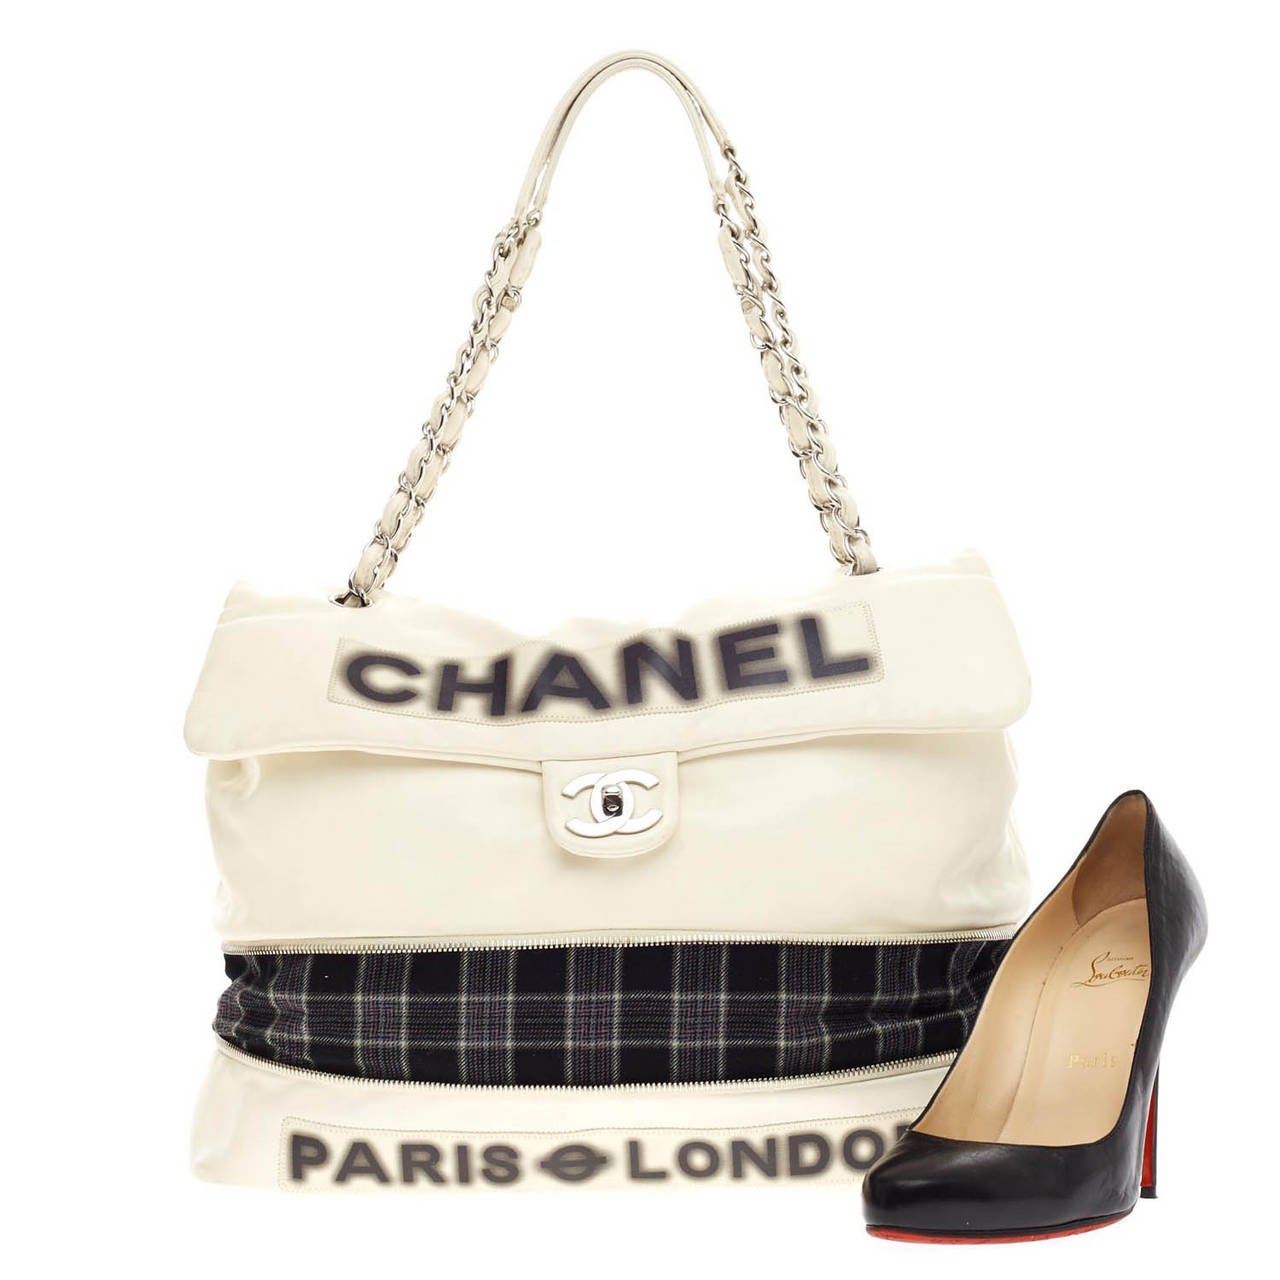 This eye-catching authentic Chanel Expandable Flap Paris London in size Large showcases an urban-chic appeal for the boldest of fashionistas. This simple white flap bag is detailed with stylish Chanel graffiti blurry prints, silver leather woven